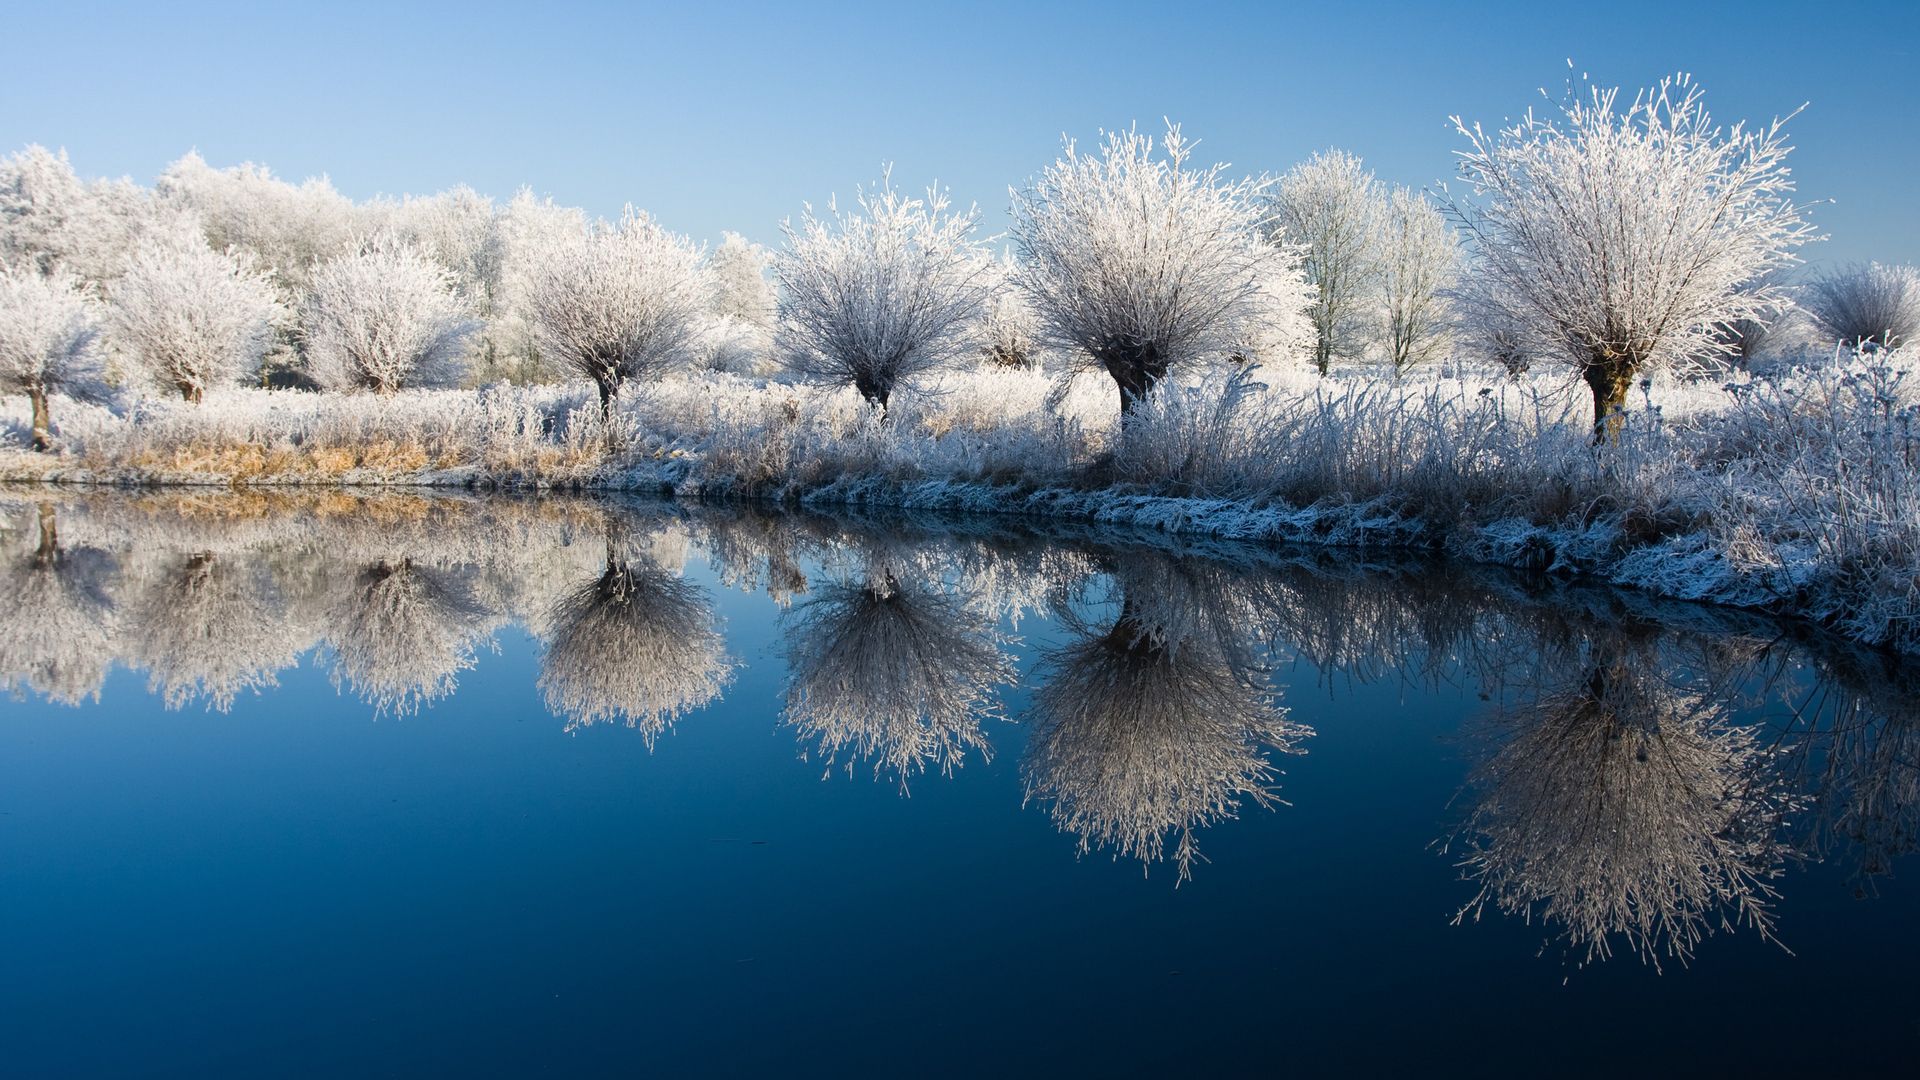 A winter landscape with trees covered in snow and their reflection in the water. - Nature